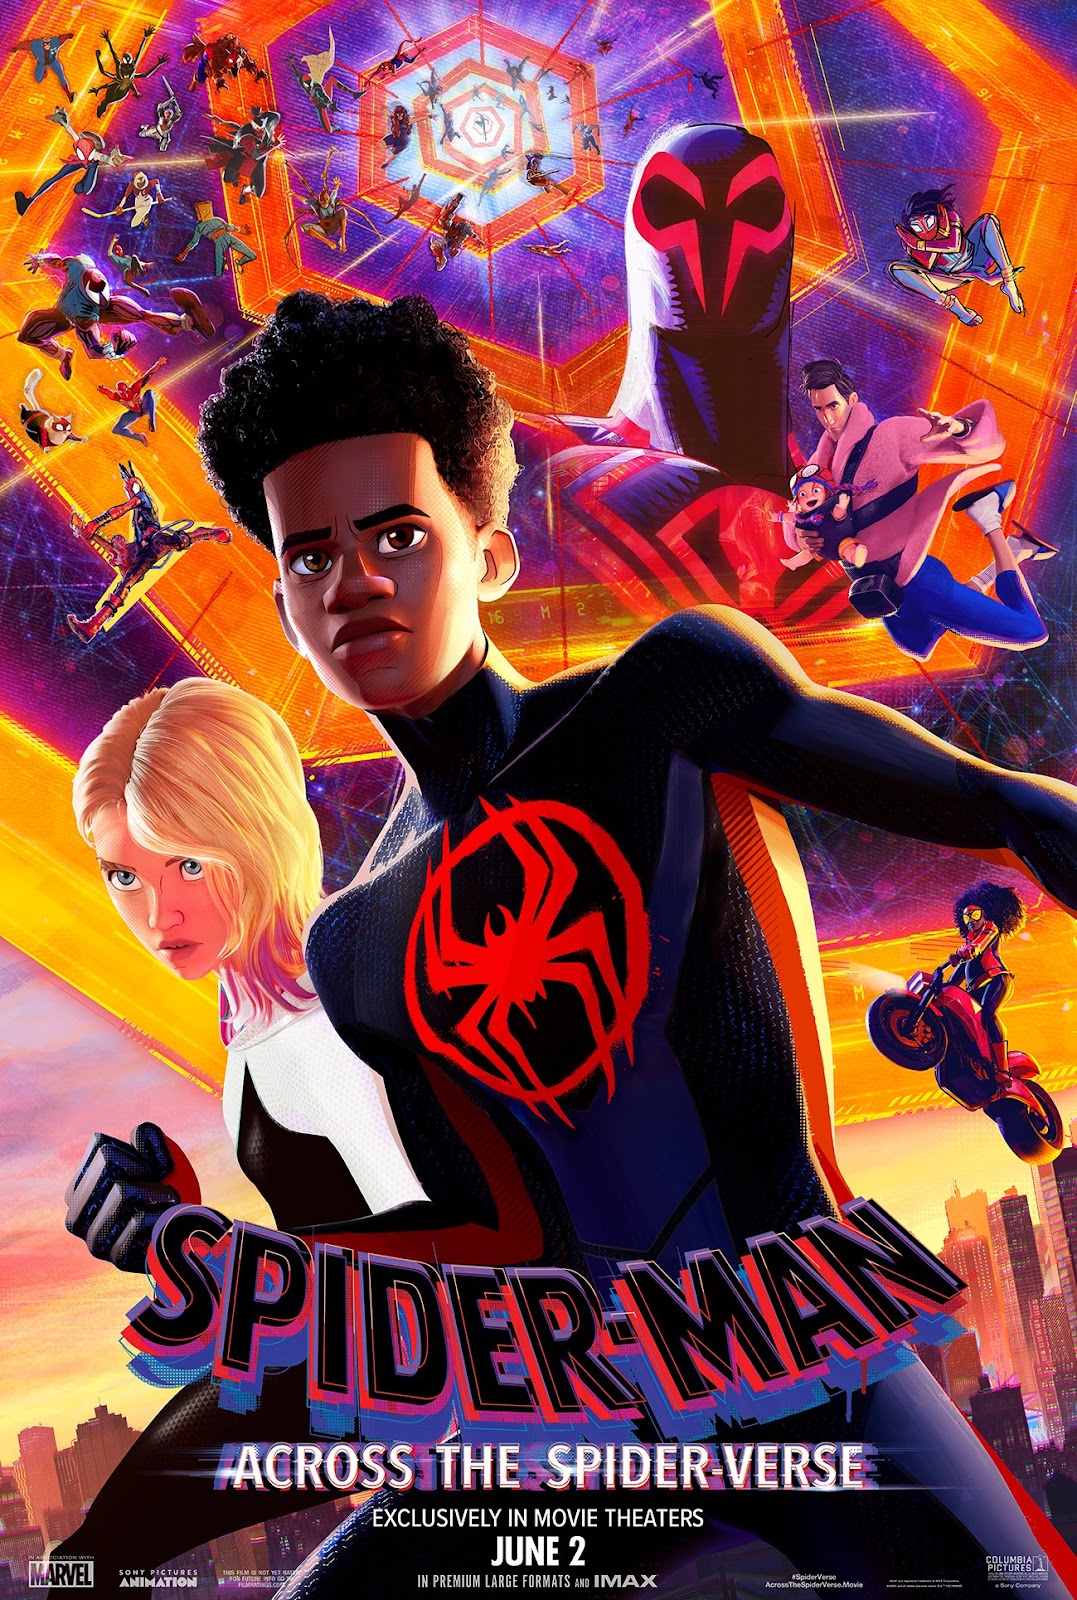 Metro Boomin - METRO BOOMIN PRESENTS SPIDER-MAN: ACROSS THE SPIDER-VERSE  (SOUNDTRACK FROM AND INSPIRED BY THE MOTION PICTURE) Lyrics and Tracklist